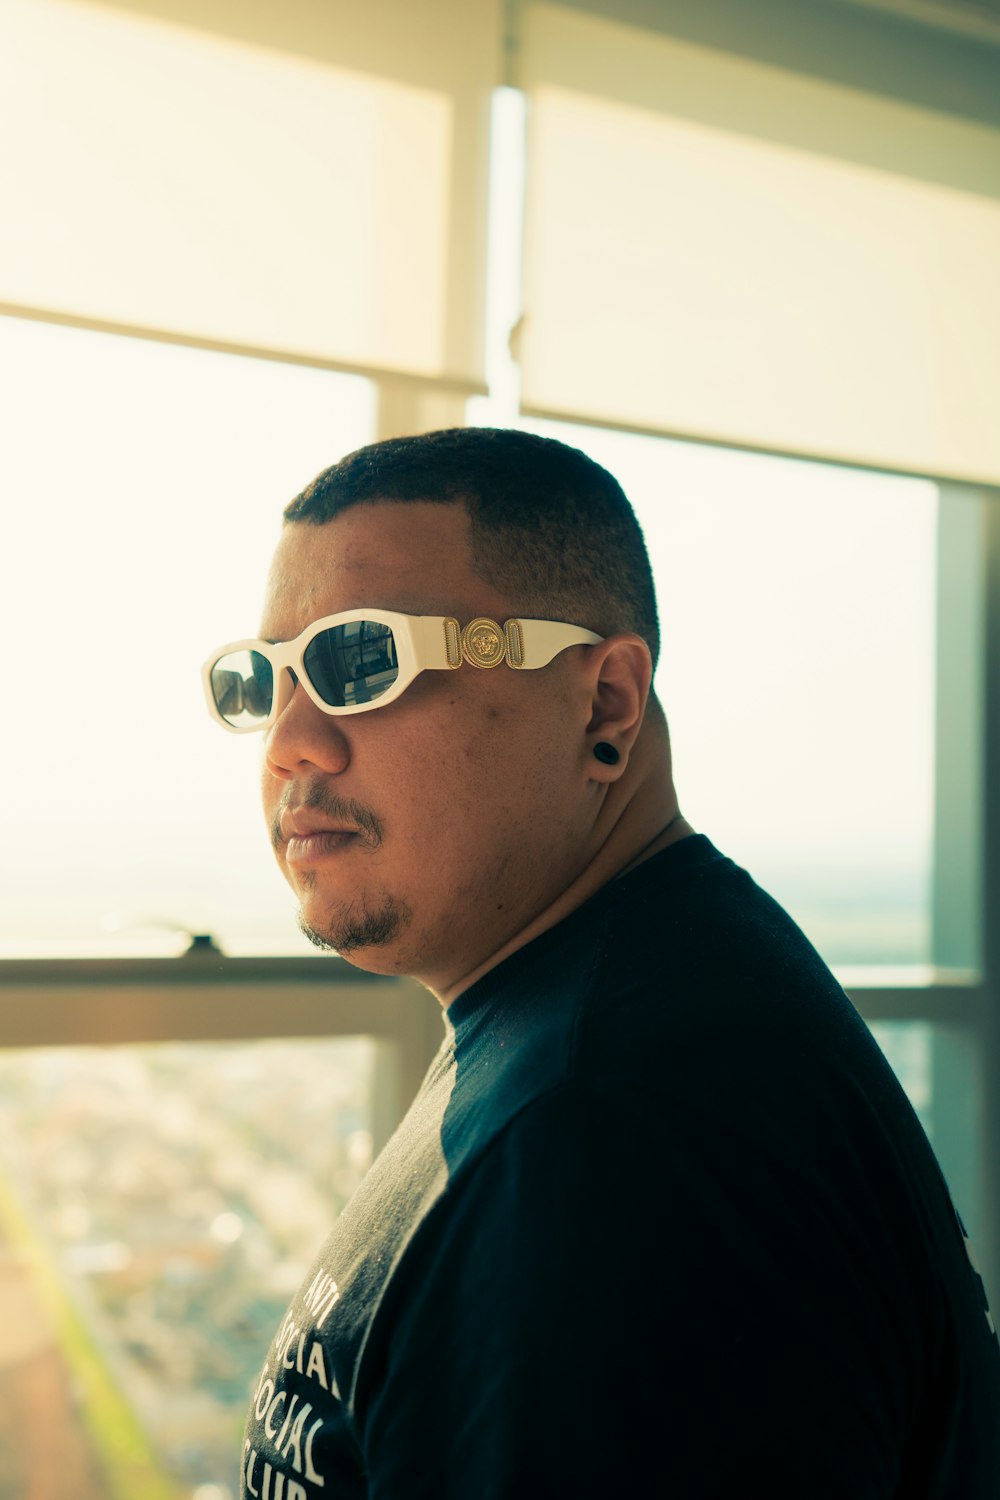 a man wearing sunglasses looking out a window